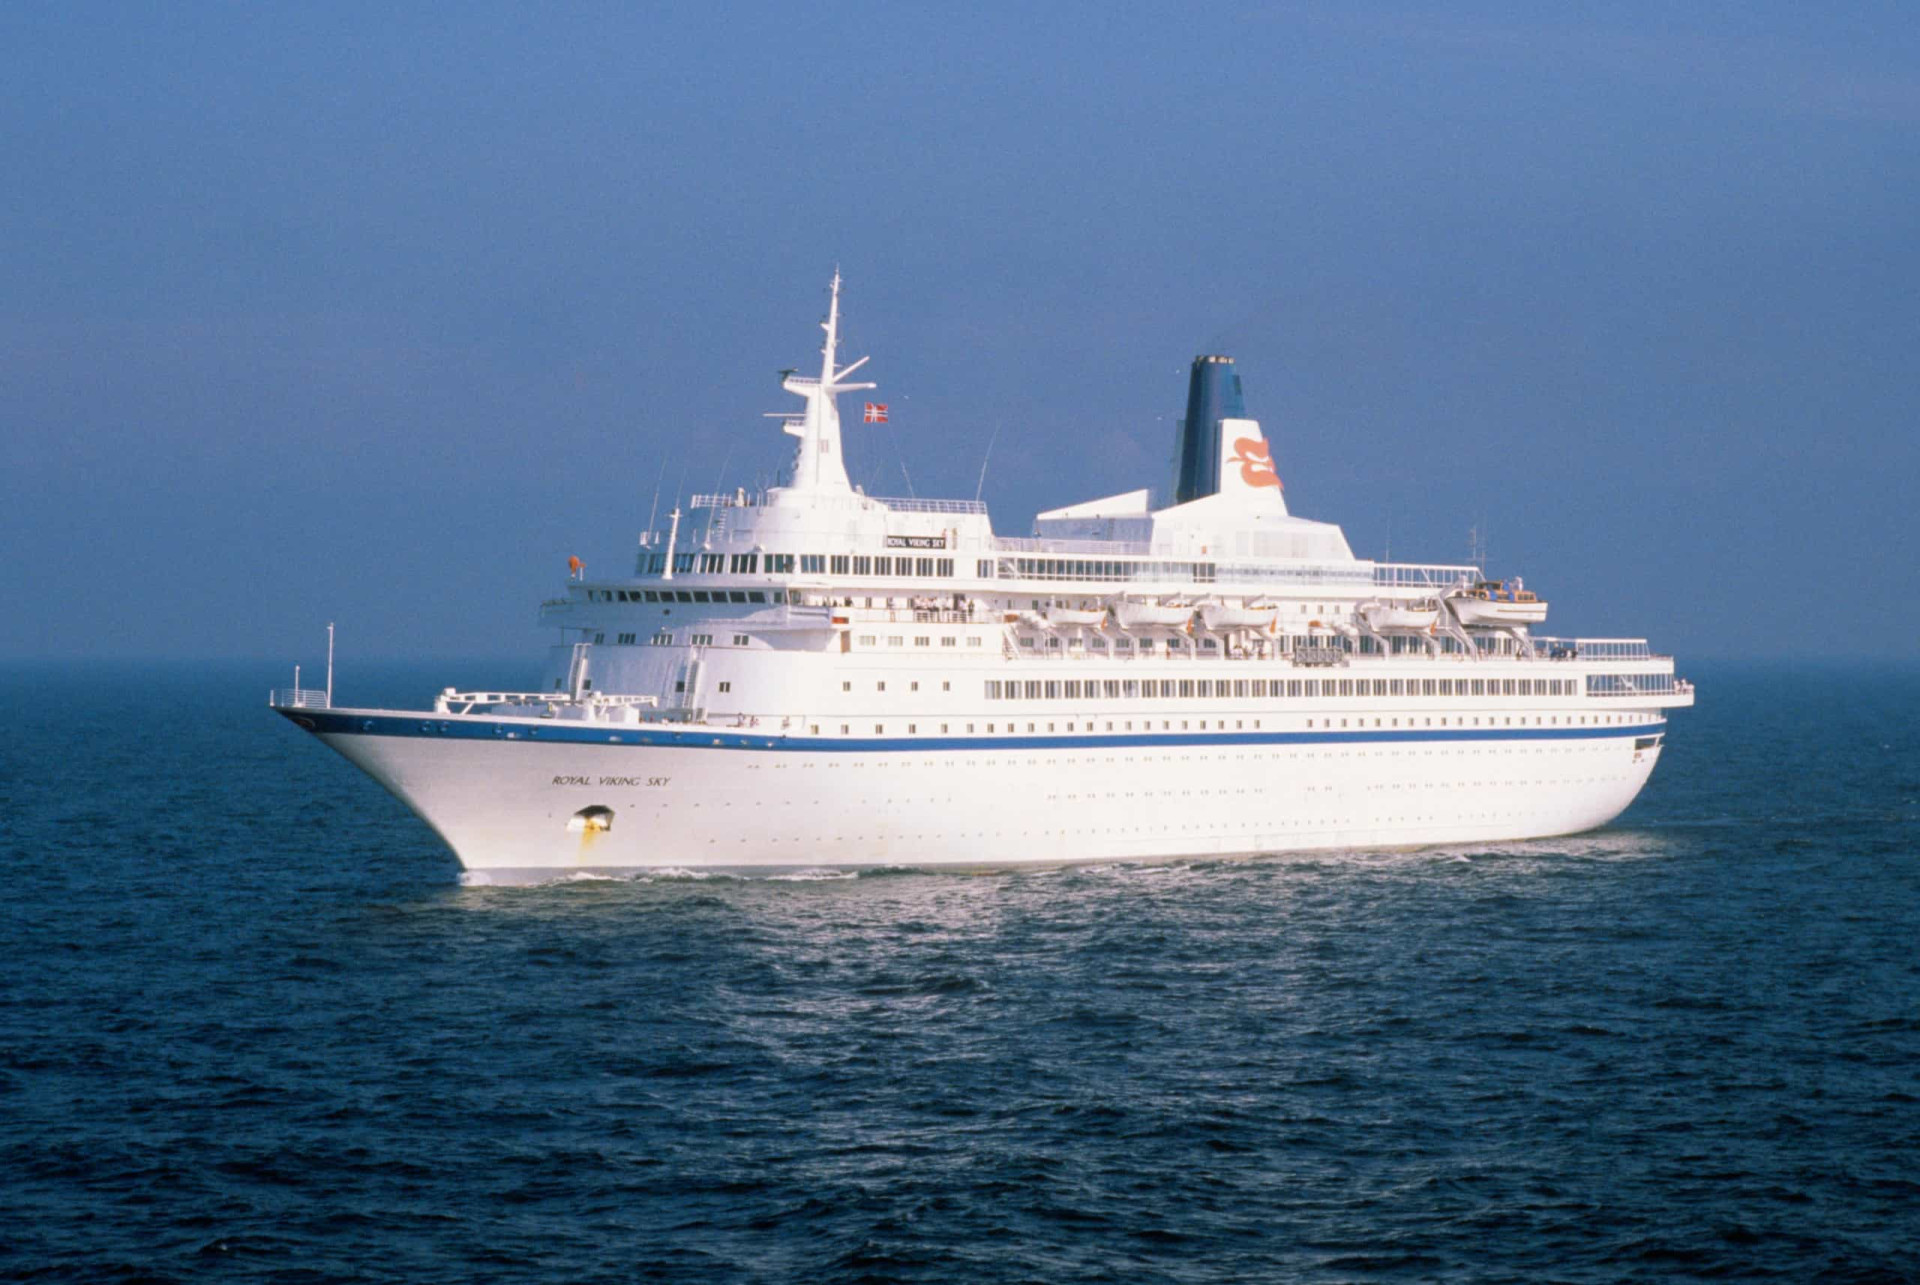 <p>By the 1970s and 1980s, cruise ship vacations were no longer the sole preserve of the wealthy. And in the wake of this boom in holidays on the high seas came more cruise ships lines: Carnival in 1972; Celebrity Cruises in 1989; and Silversea in 1994. </p>